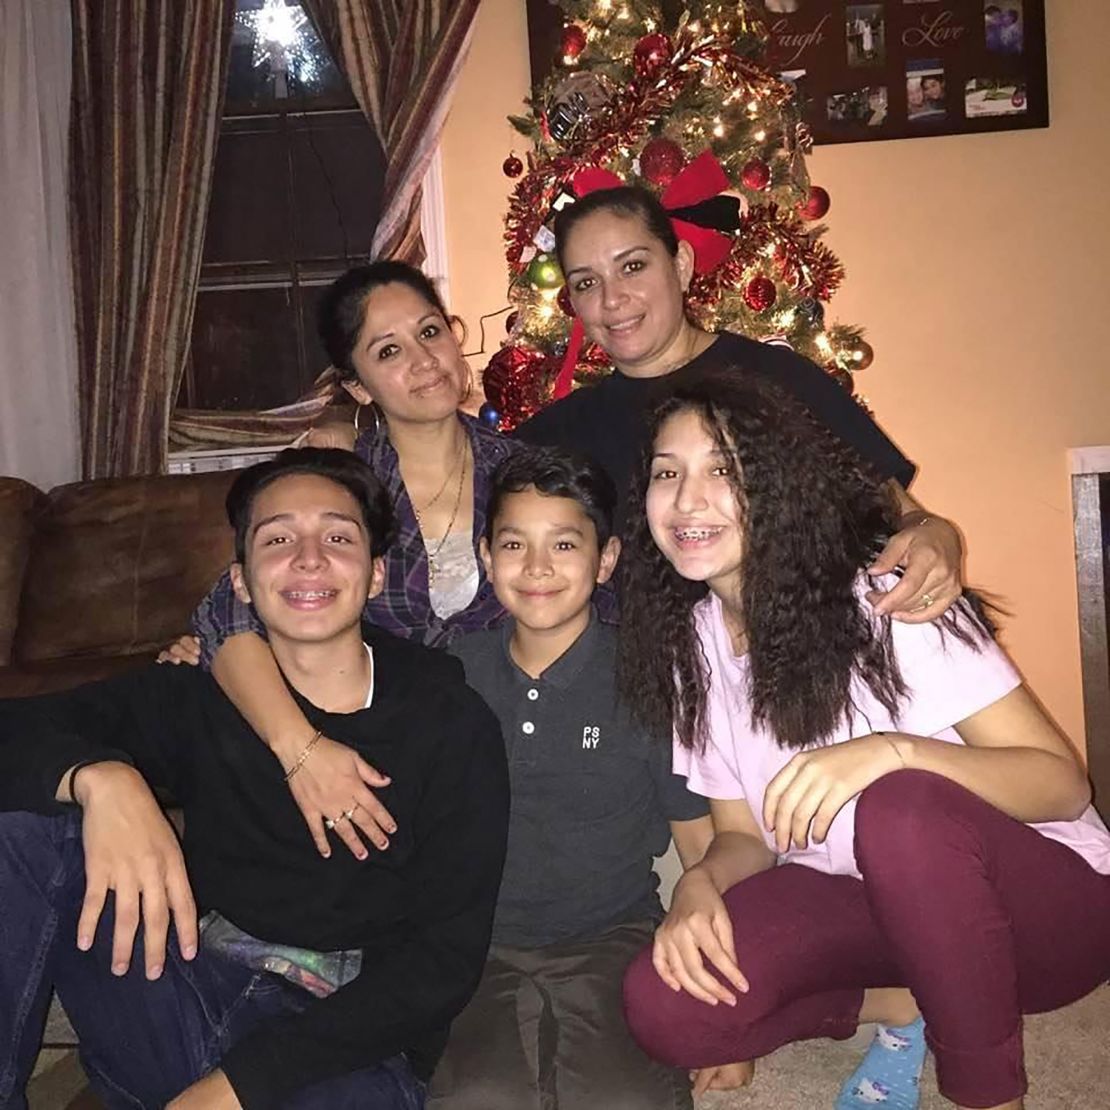 Eubdulia and Claudia (right) celebrate the holidays with their children Alejandro, Alex and Vanessa when they were younger.